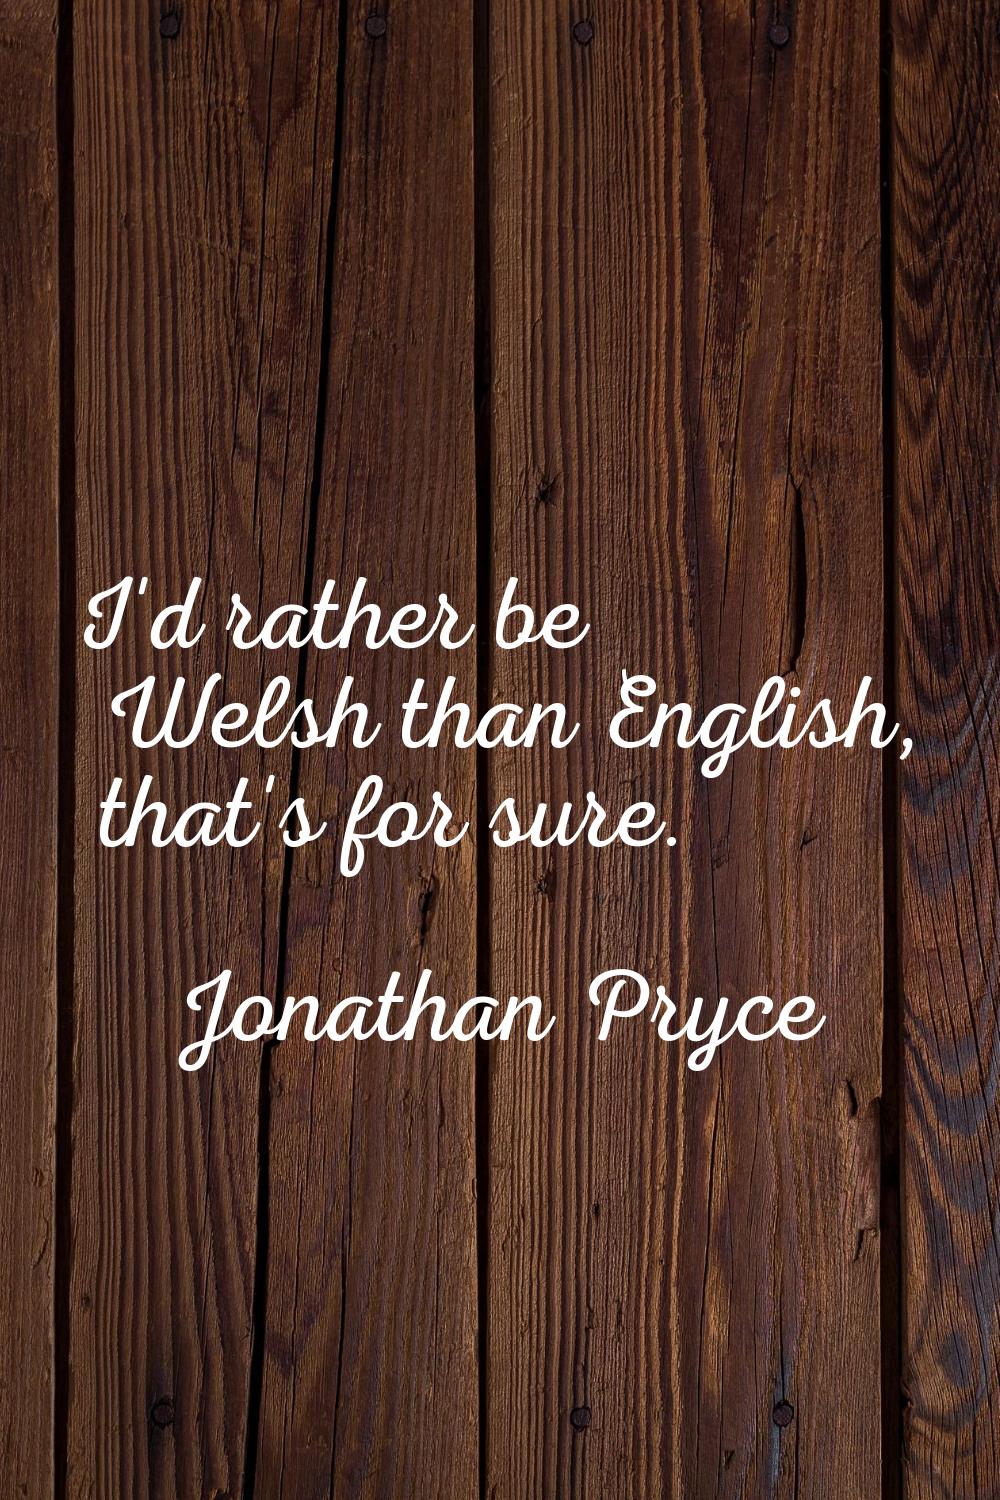 I'd rather be Welsh than English, that's for sure.